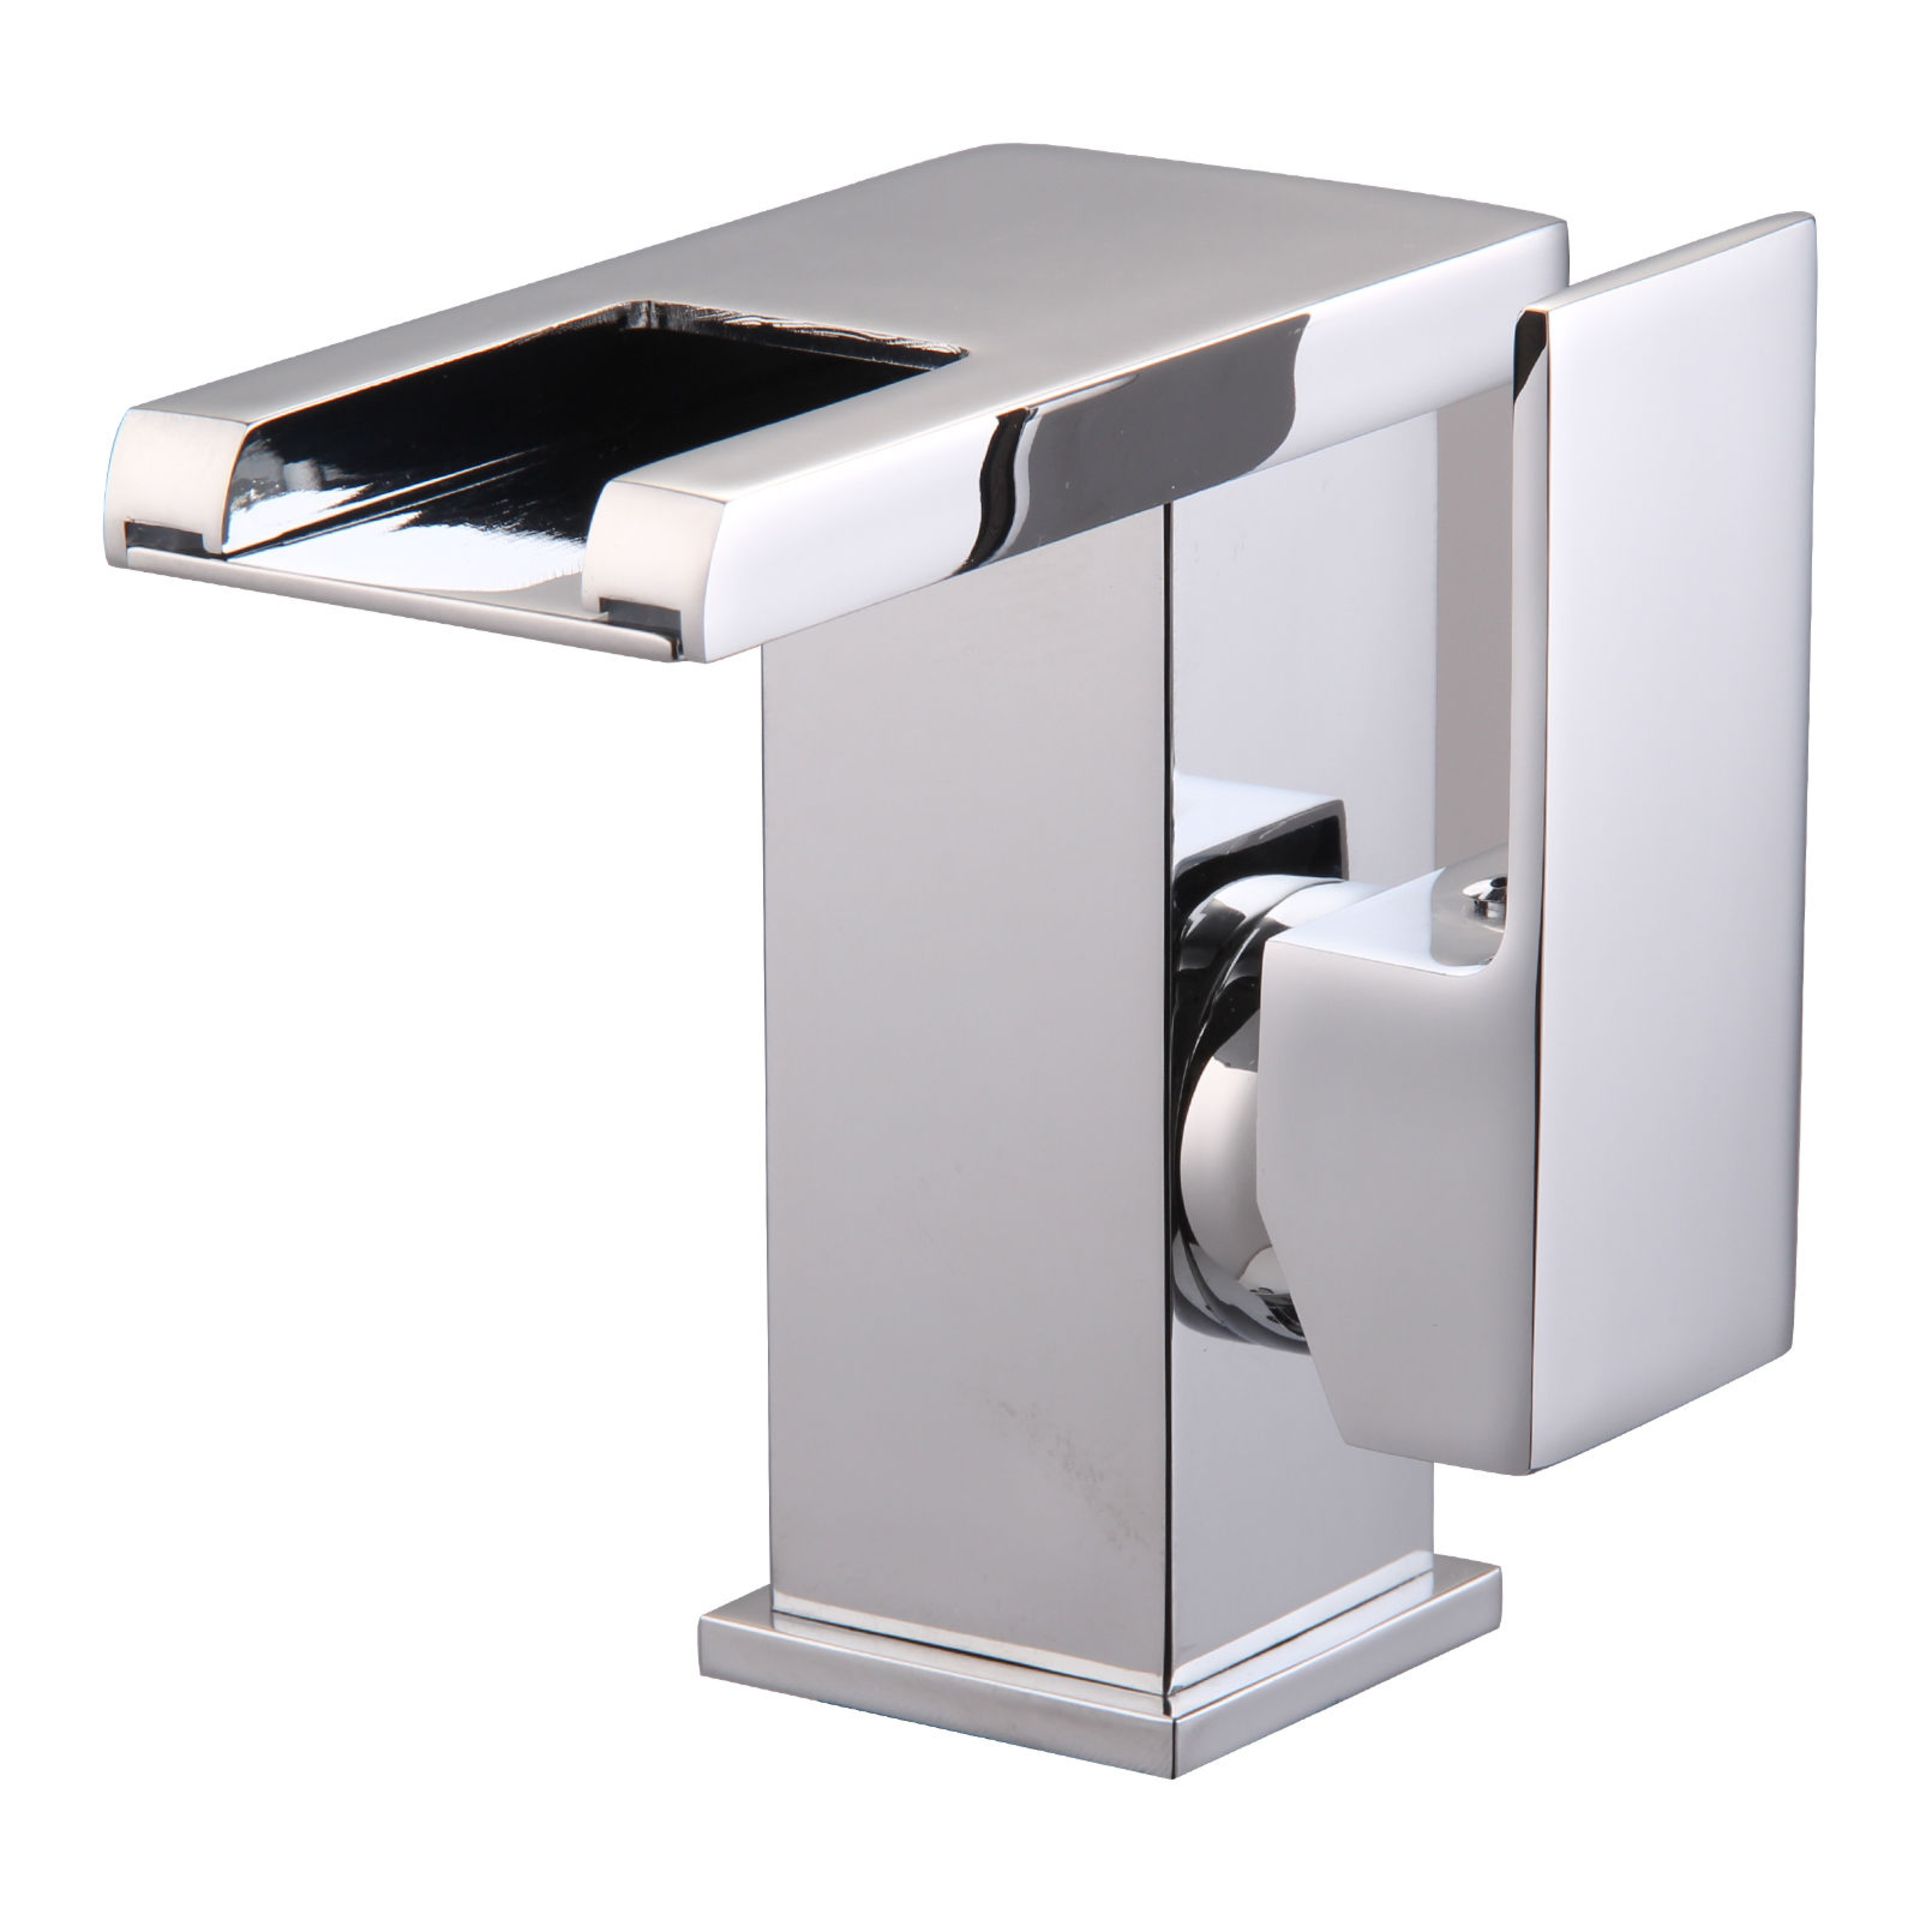 (M162) LED Waterfall Bathroom Basin Mixer Tap. RRP £229.99. Easy to install and clean. All copper - Image 2 of 3